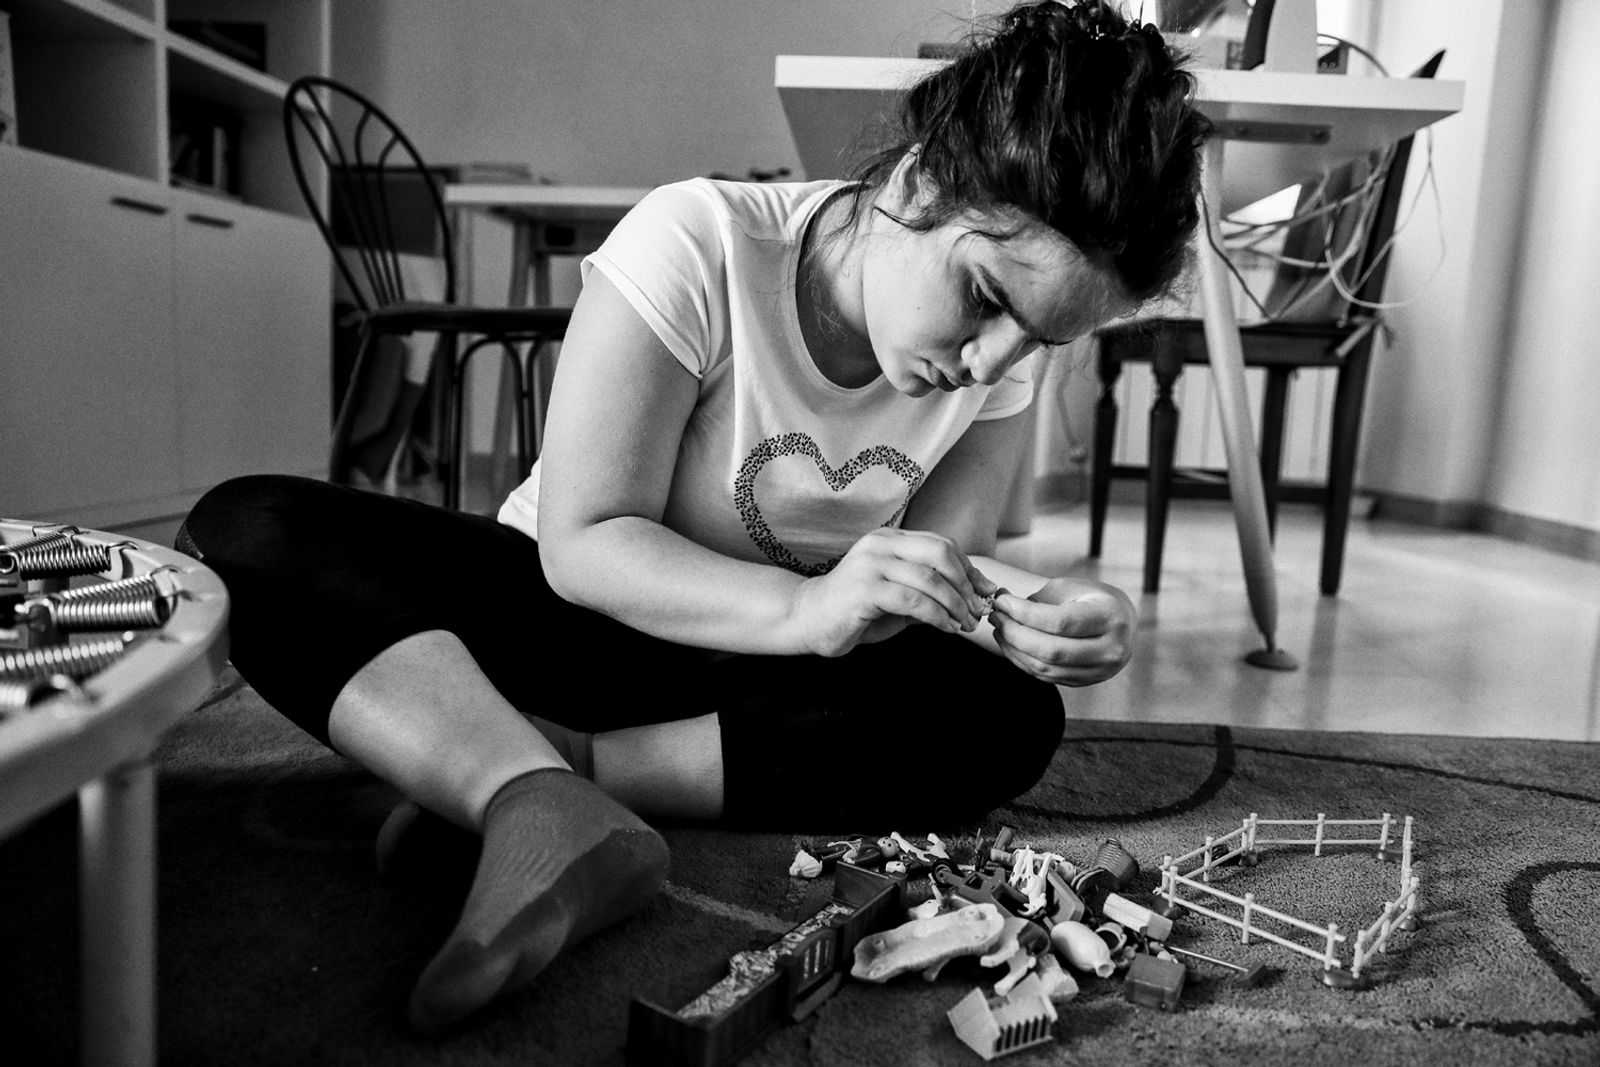 © BARBARA ZANON - Magione, Perugia, Italy - July 2018. Luisa (12) plays with her games at home.